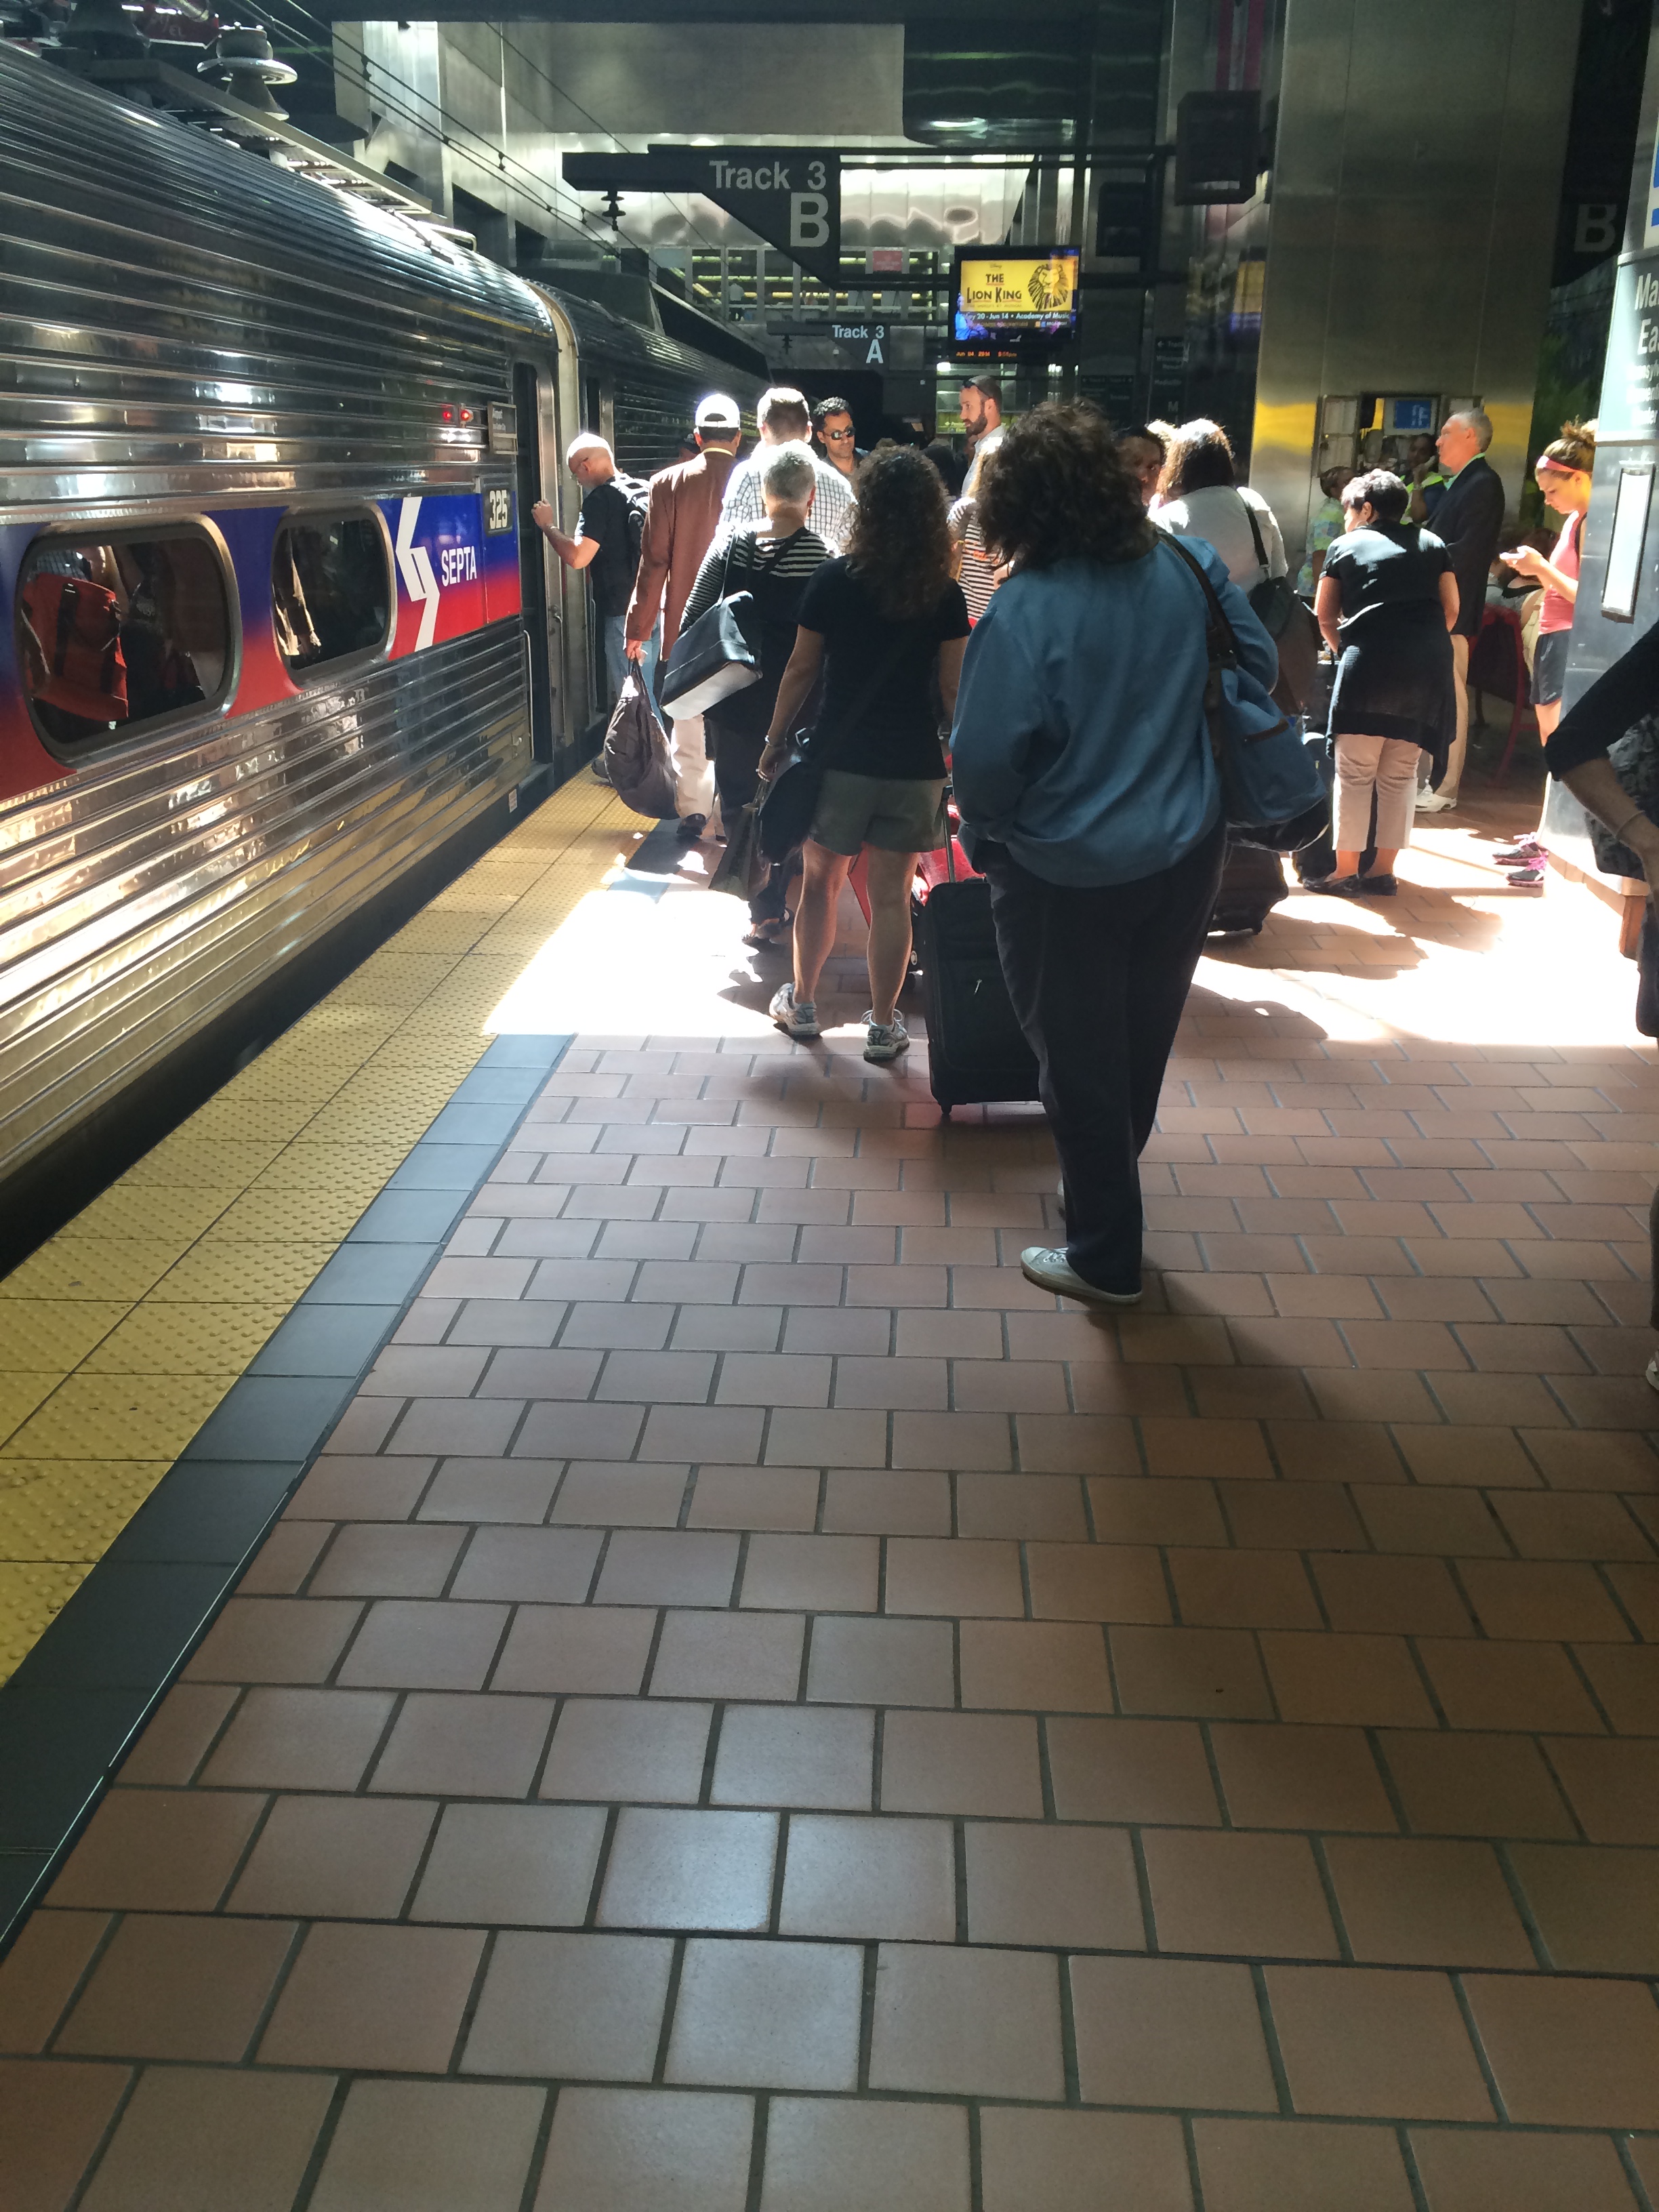 Airport train boarding in Center City. Rear door of second car isn't open, creating a bottleneck of people at the center door.